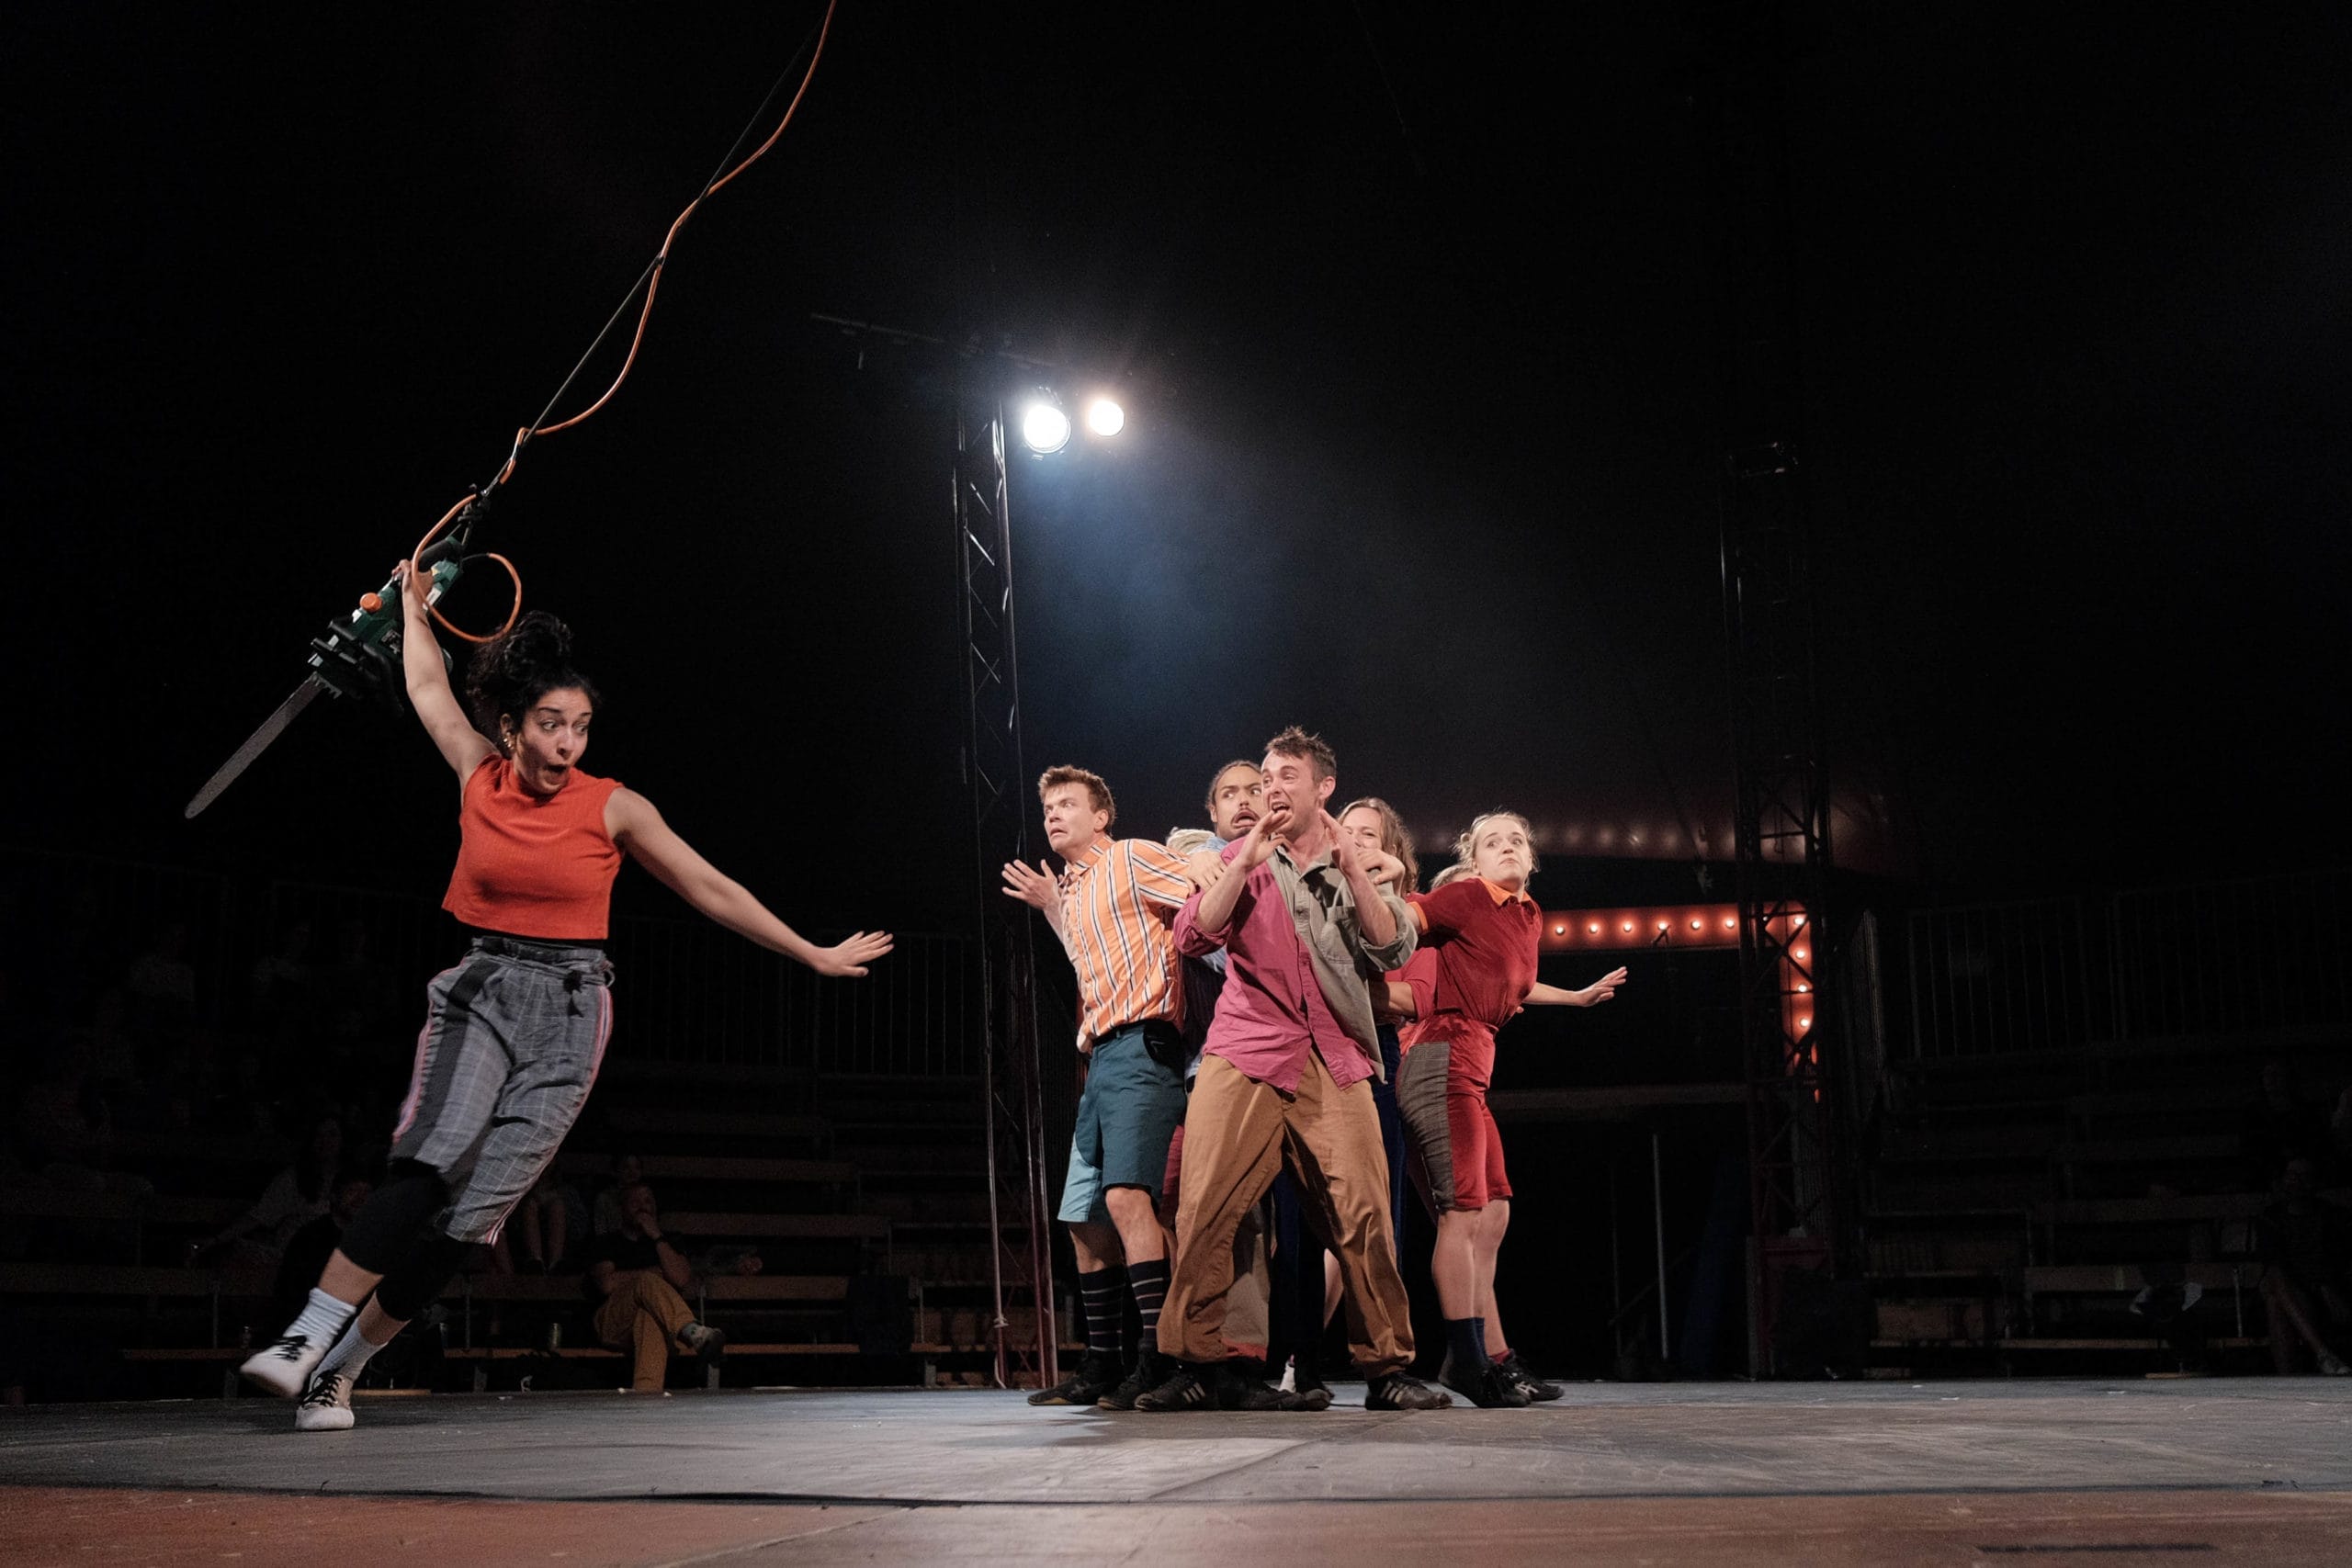 Several Revel Puck circus members are grouped in the centre of the stage, wearing dramatic expressions. One member of the troupe is attached to a suspended rope and chainsaw, about to take flight.